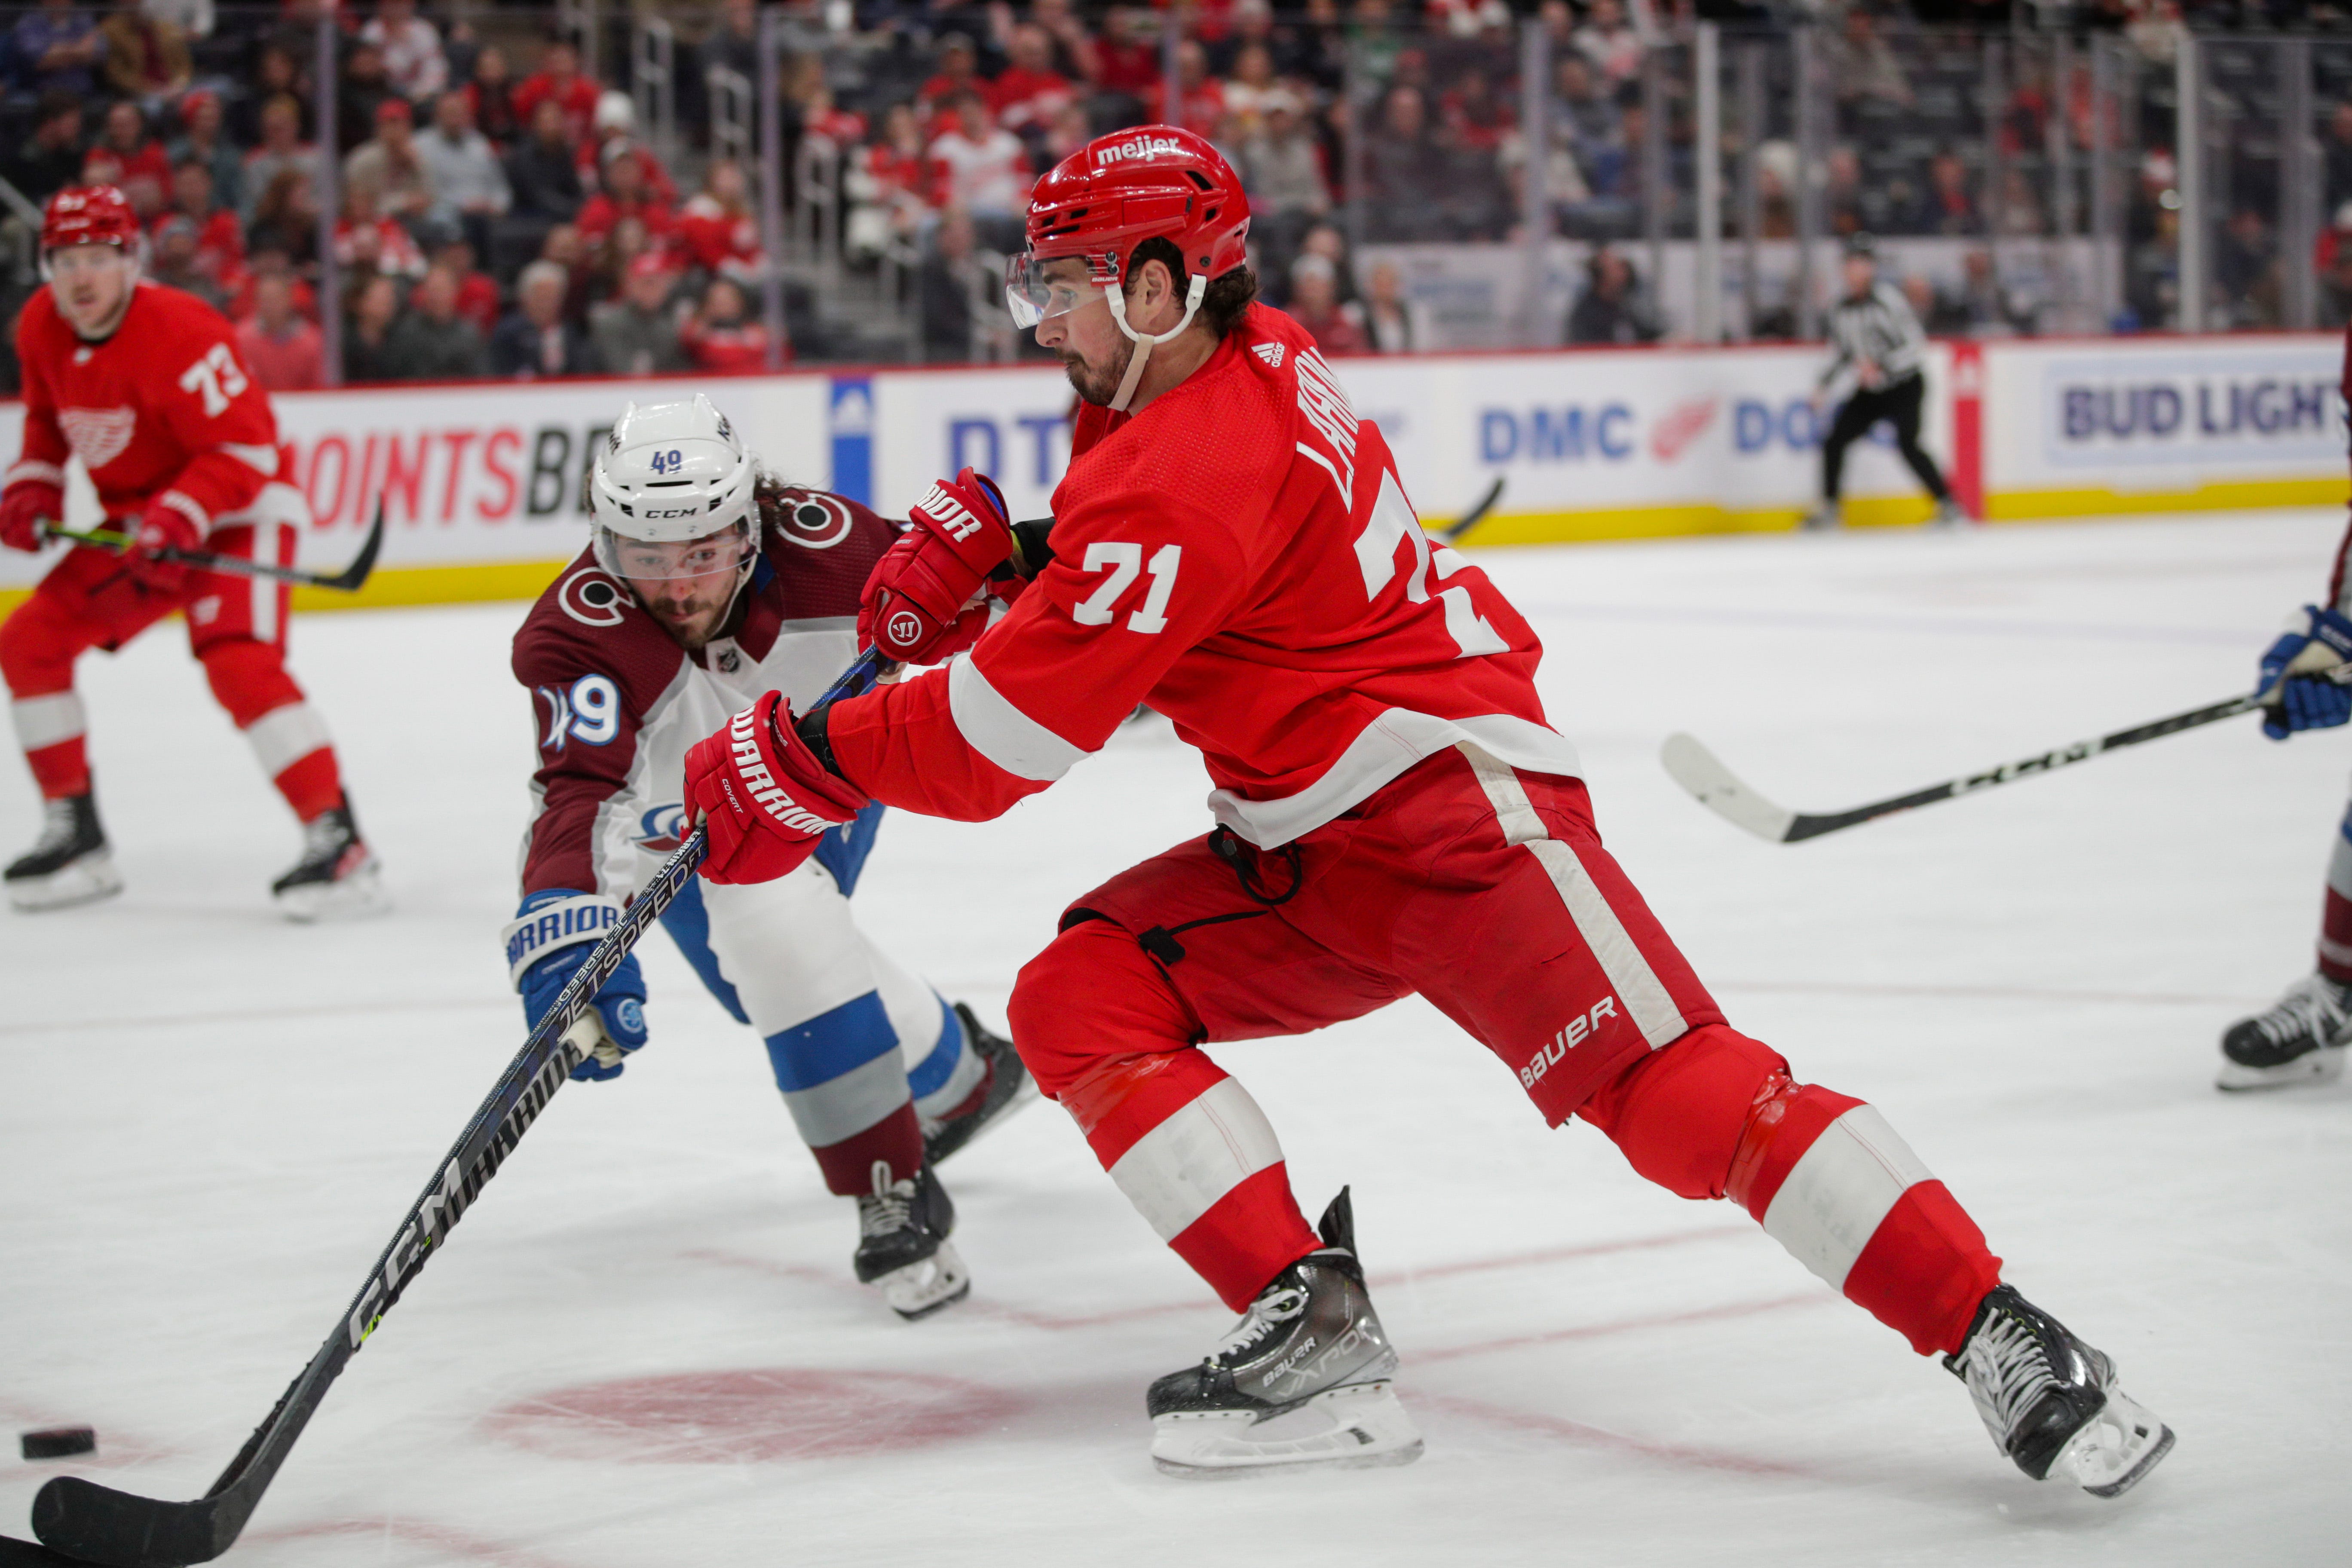 Detroit Red Wings game score vs. St. Louis Blues: How to watch tonights game